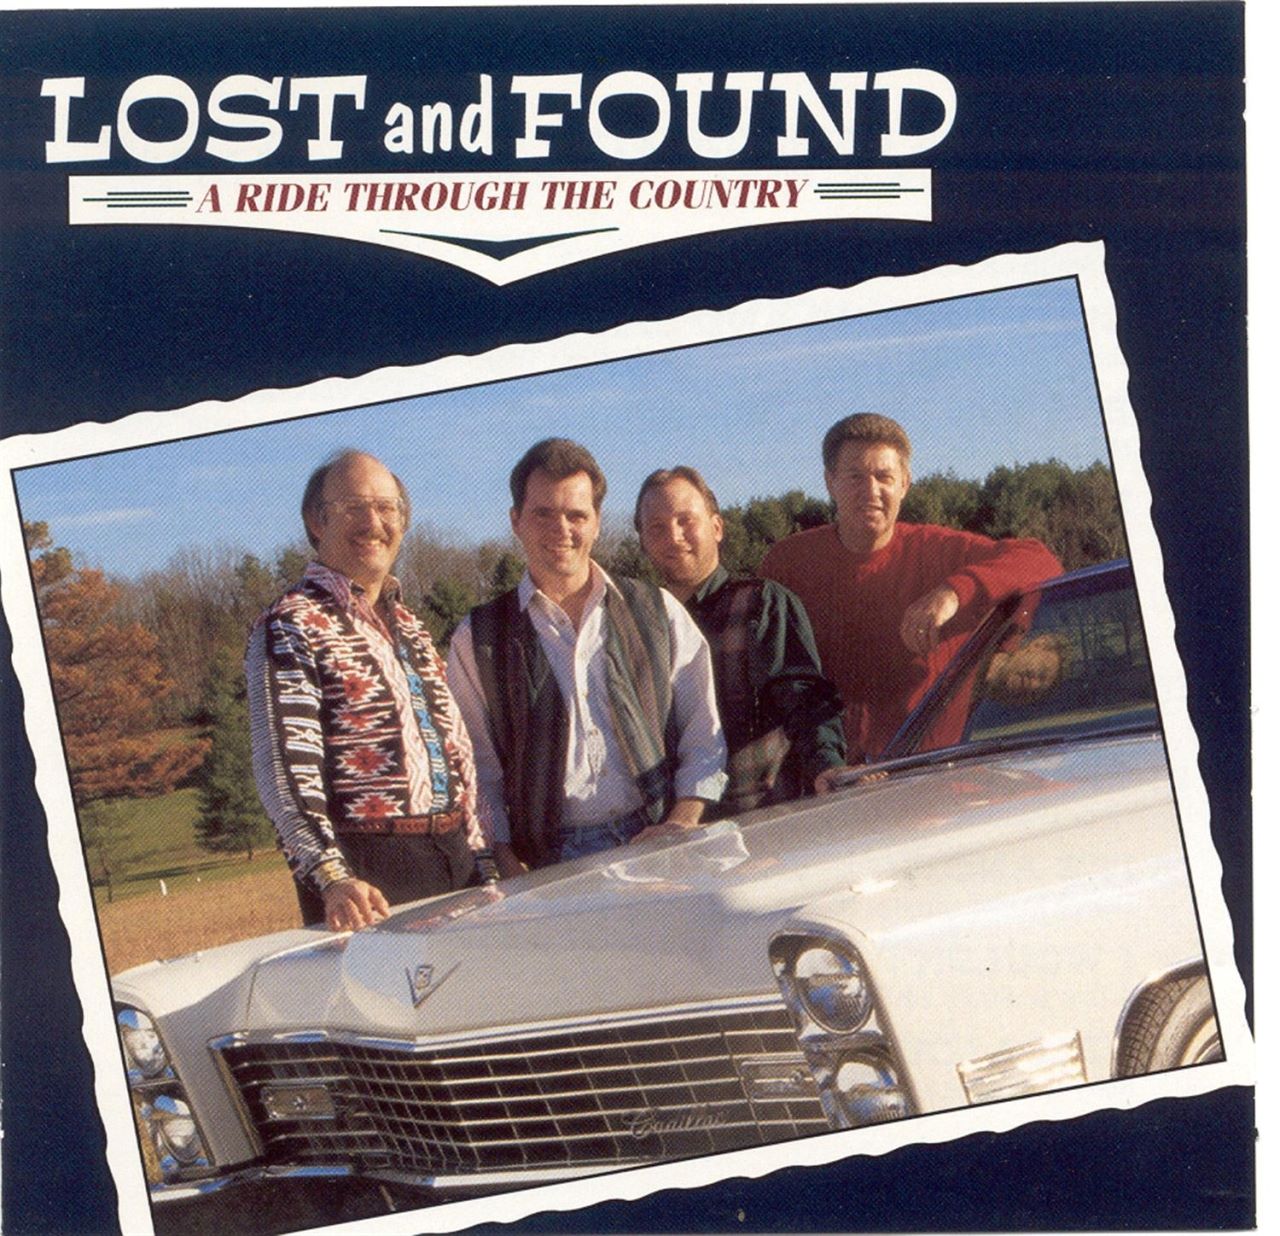 Lost & Found - A Ride Through The Country cover album